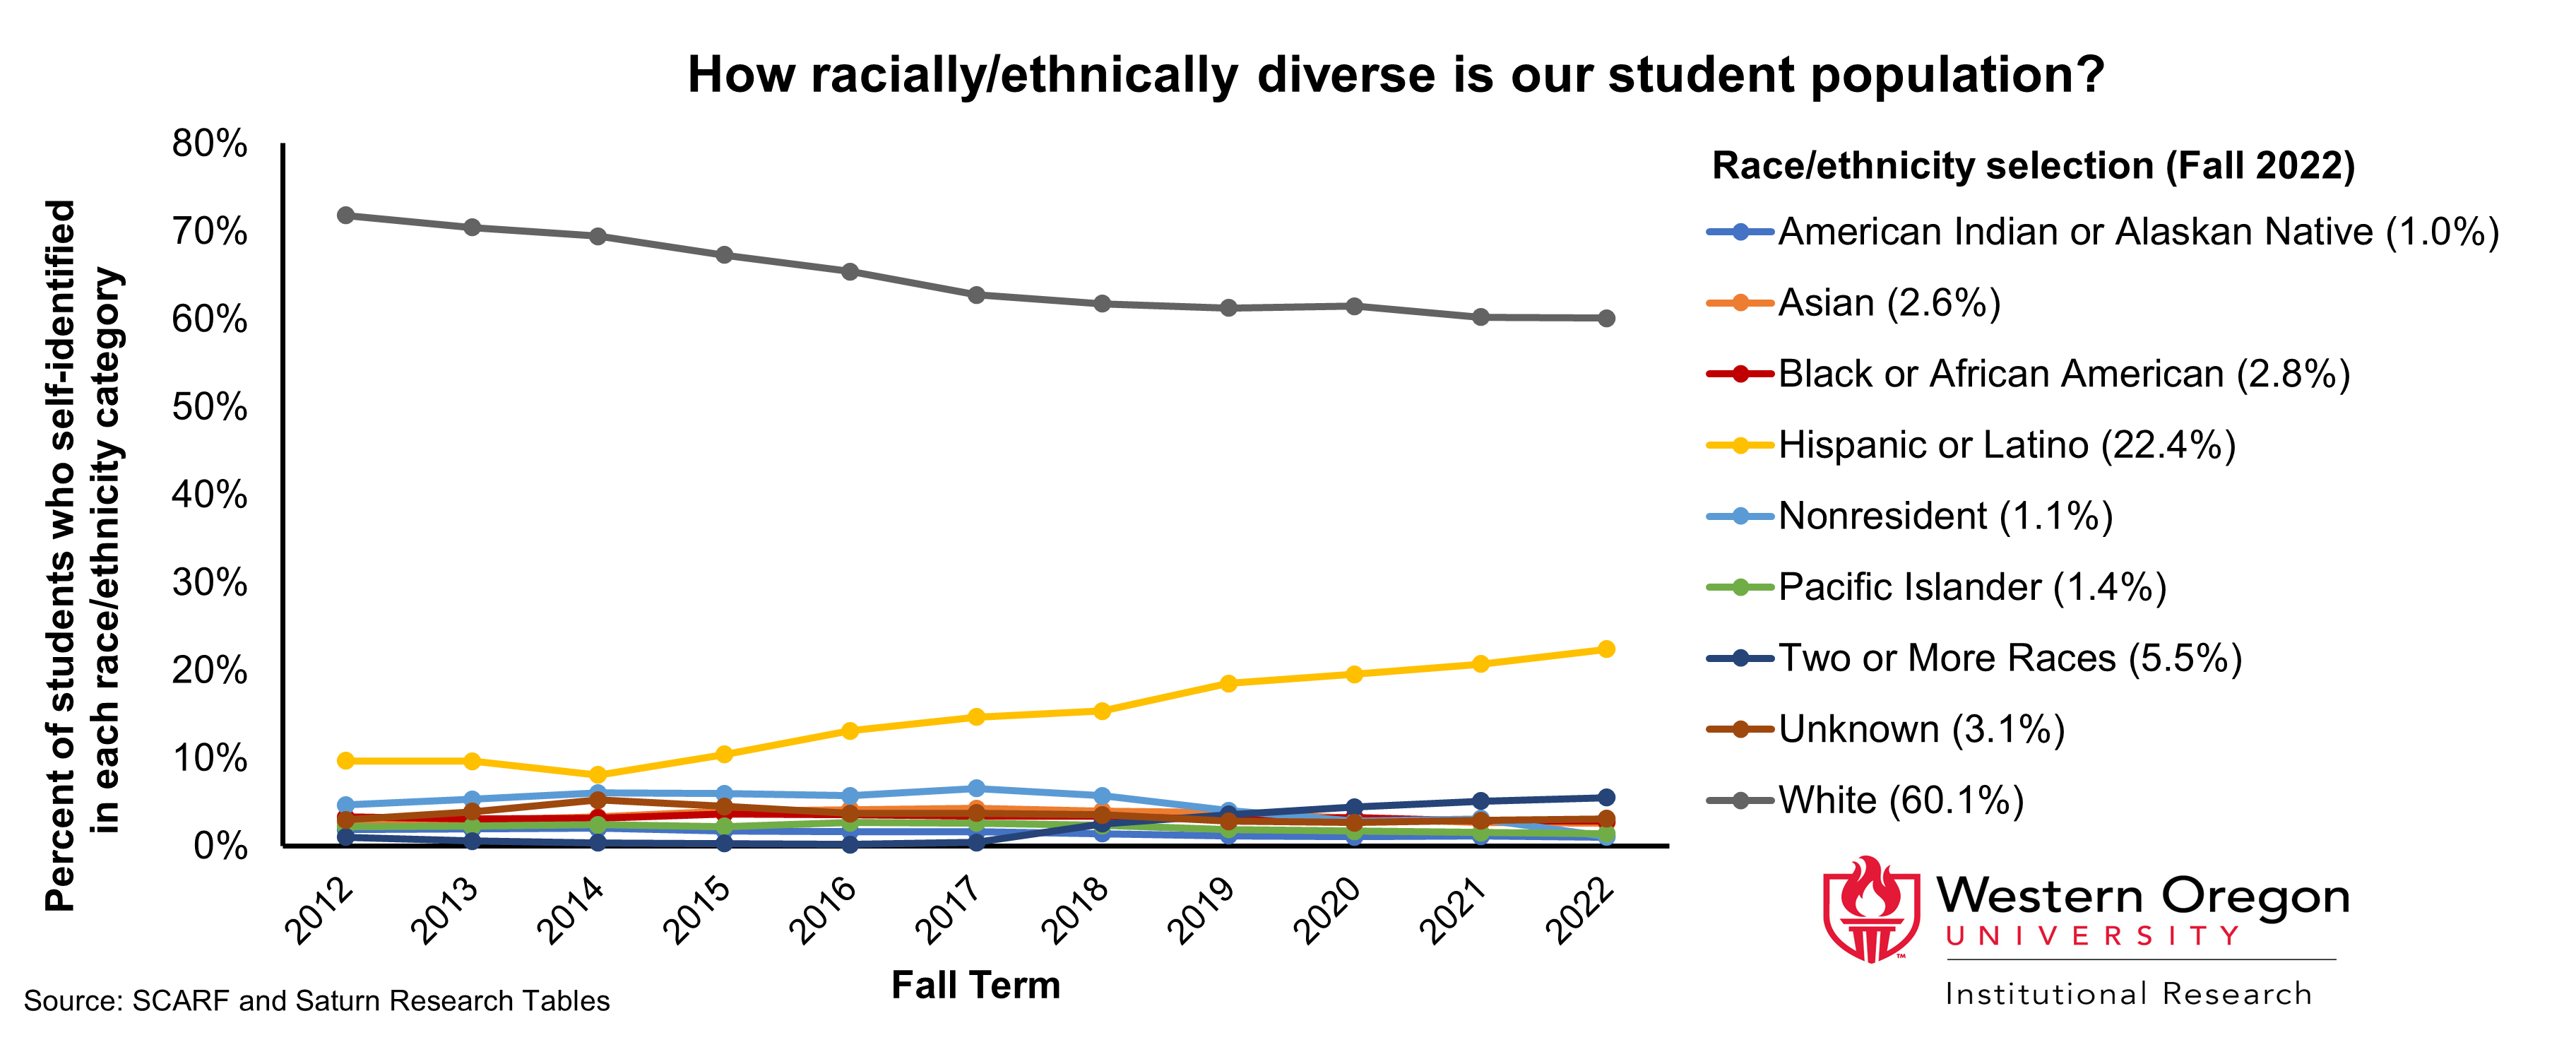 Line graph of enrollment percentages since 2012 for a variety of WOU self-identified race/ethnicity categories, showing that enrollment for White students has been declining, while enrollment for Hispanic or Latinx students has been increasing. Enrollment for students in other race/ethnicity categories has remained largely stable over time